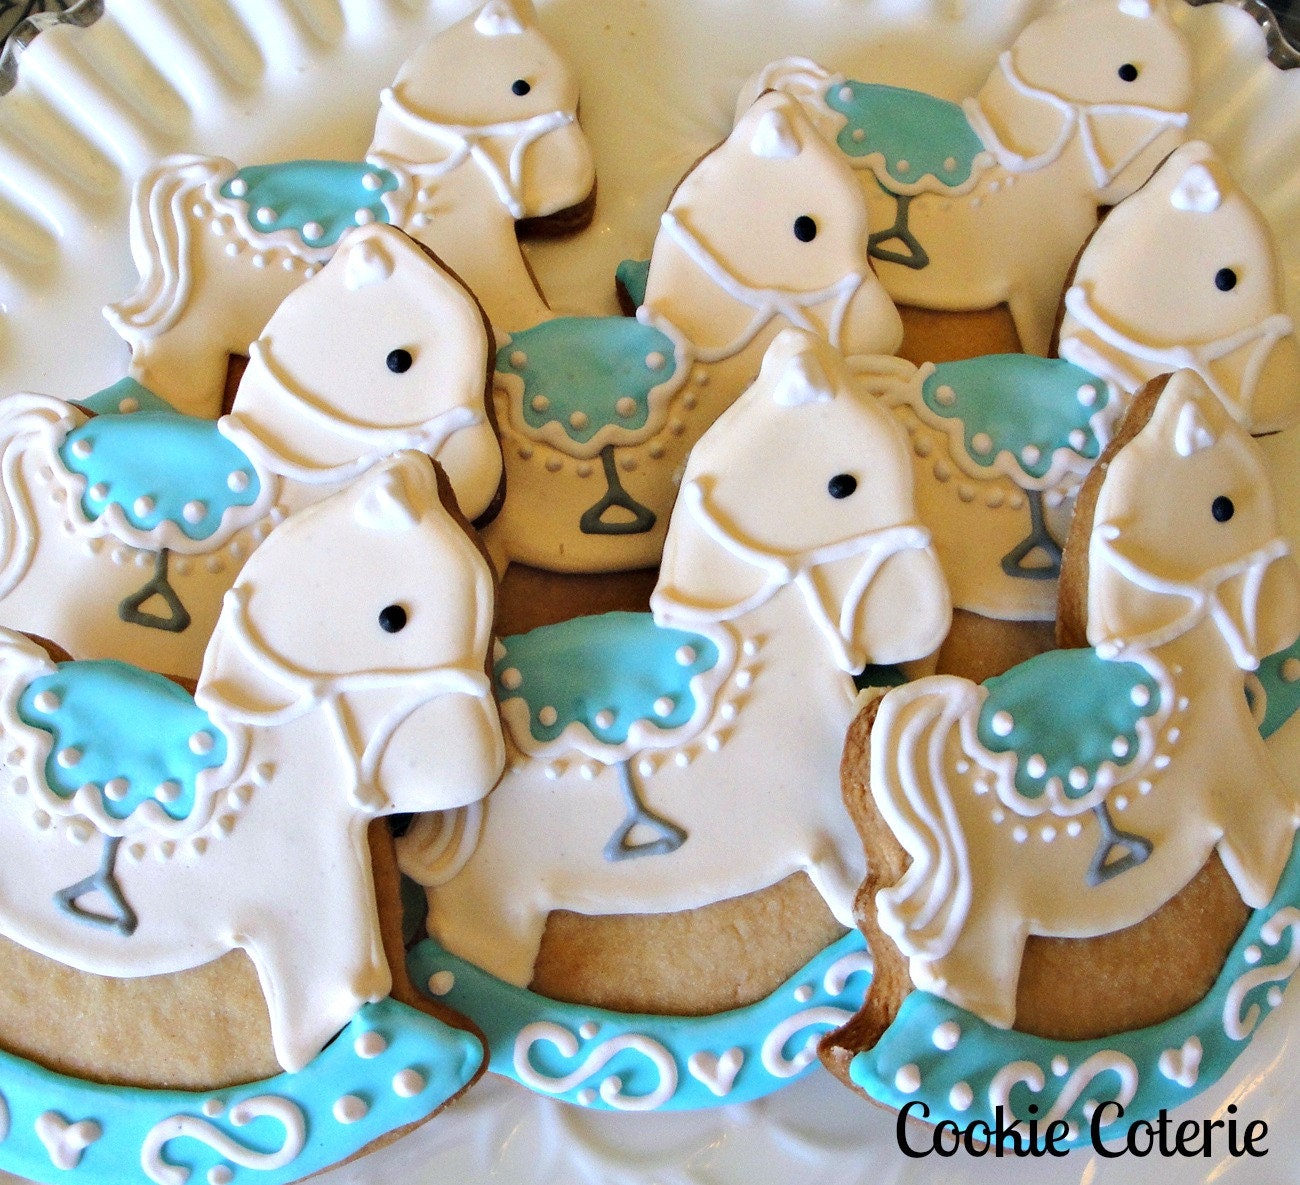 Popular items for cookie baby shower on Etsy